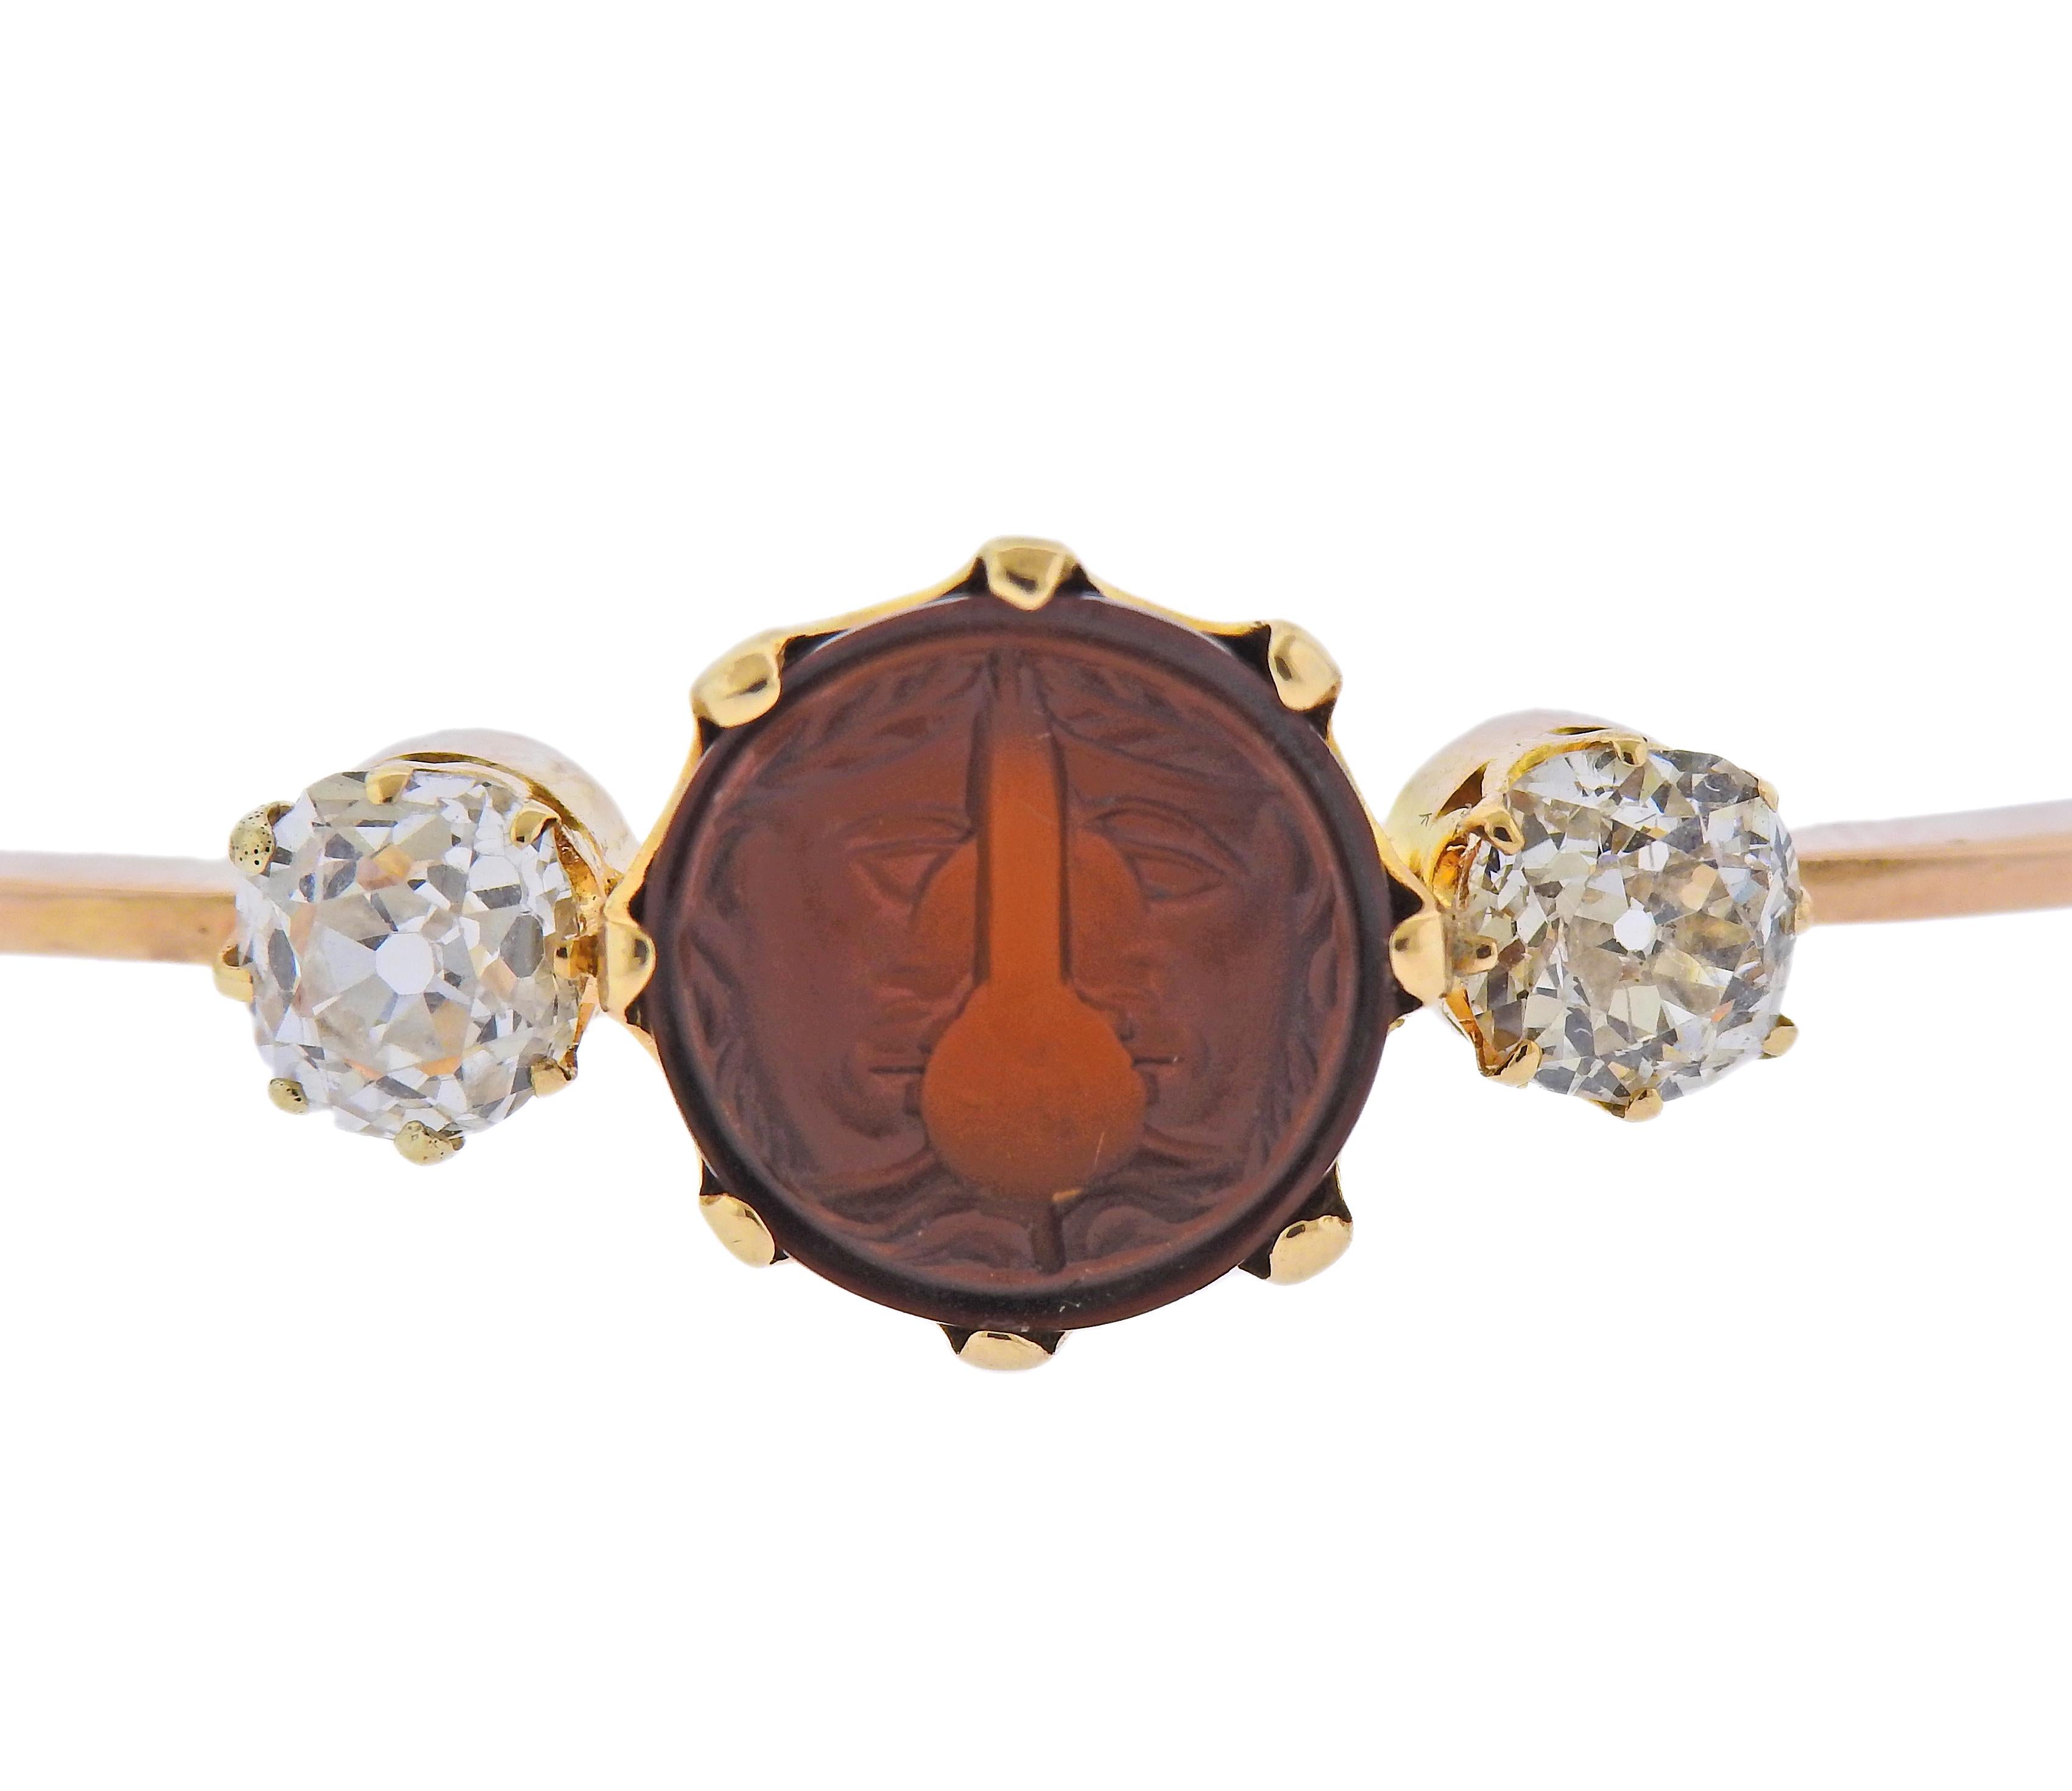 Antique 18k gold bangle bracelet, with one center carnelian intaglio, set with two side old mine cut diamonds - approx. 0.75-0.80ct each. Bracelet will fit approx. 7